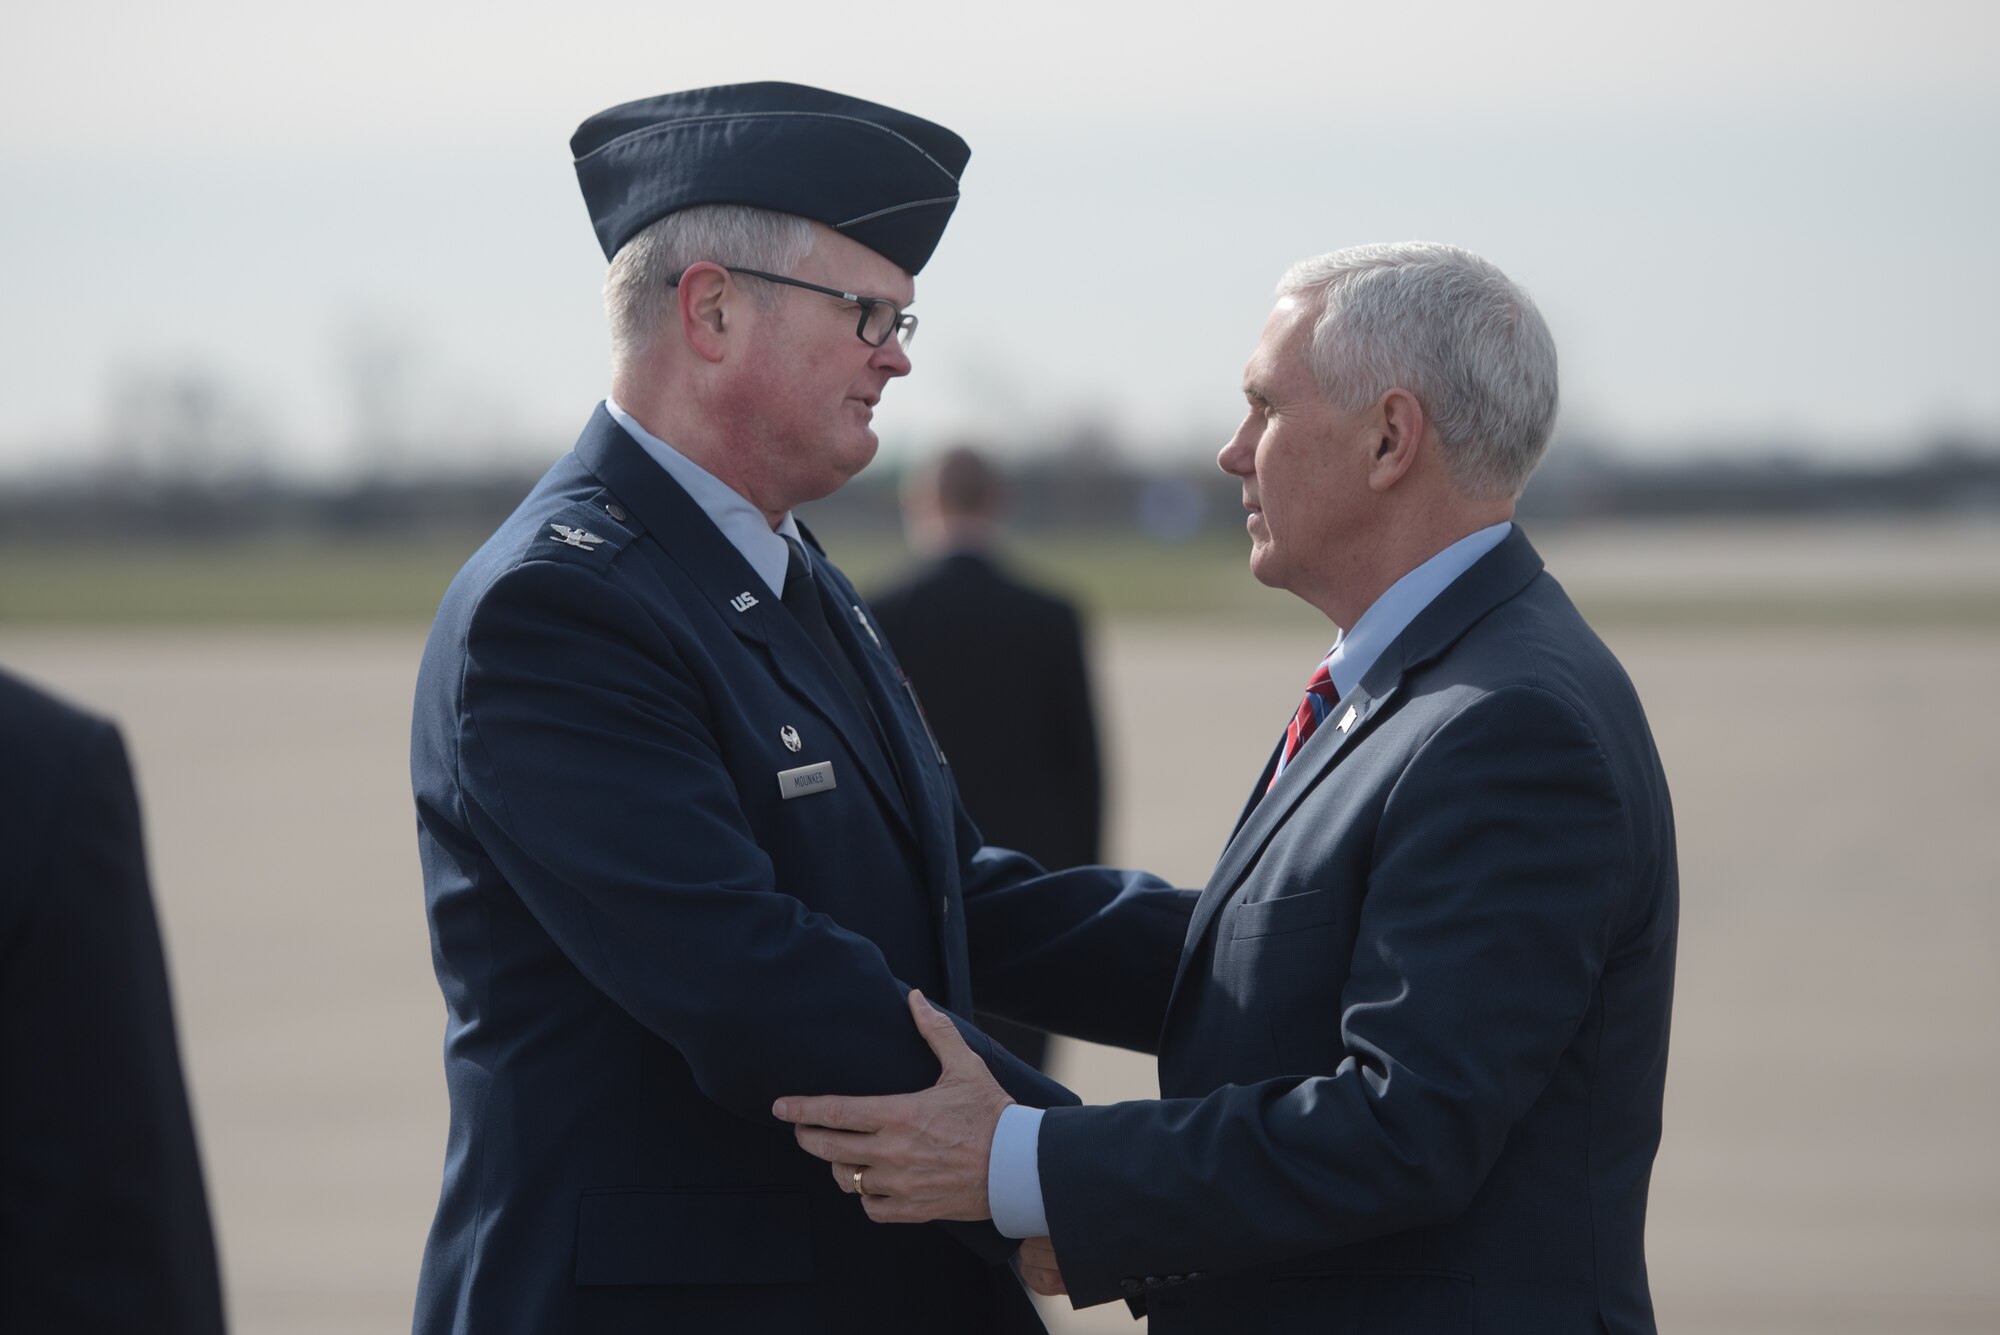 Col. David Mounkes (left), commander of the 123rd Airlift Wing, greets Vice President Mike Pence (right) at the Kentucky Air National Guard Base in Louisville, Ky., March 11, 2017. Pence was in Louisville to speak with local business leaders about health care and the economy. (U.S. Air National Guard photo by Staff Sgt. Joshua Horton)